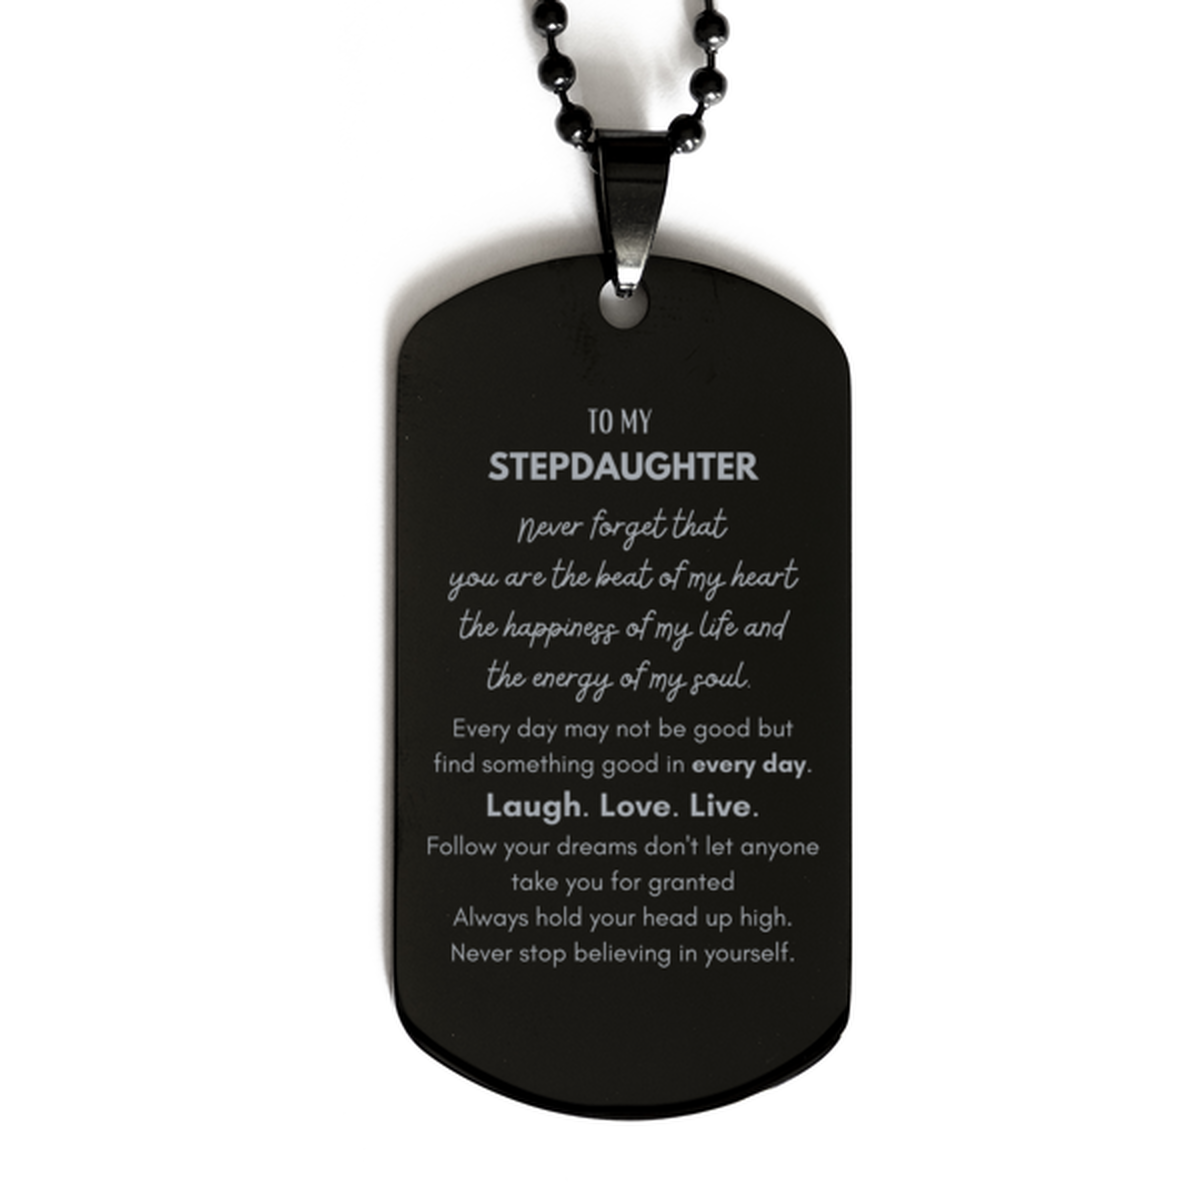 To My Stepdaughter Dogtag Gifts, Christmas Stepdaughter Black Dog Tag Present, Birthday Unique Motivational For Stepdaughter, To My Stepdaughter Never forget that you are the beat of my heart the happiness of my life and the energy of my soul